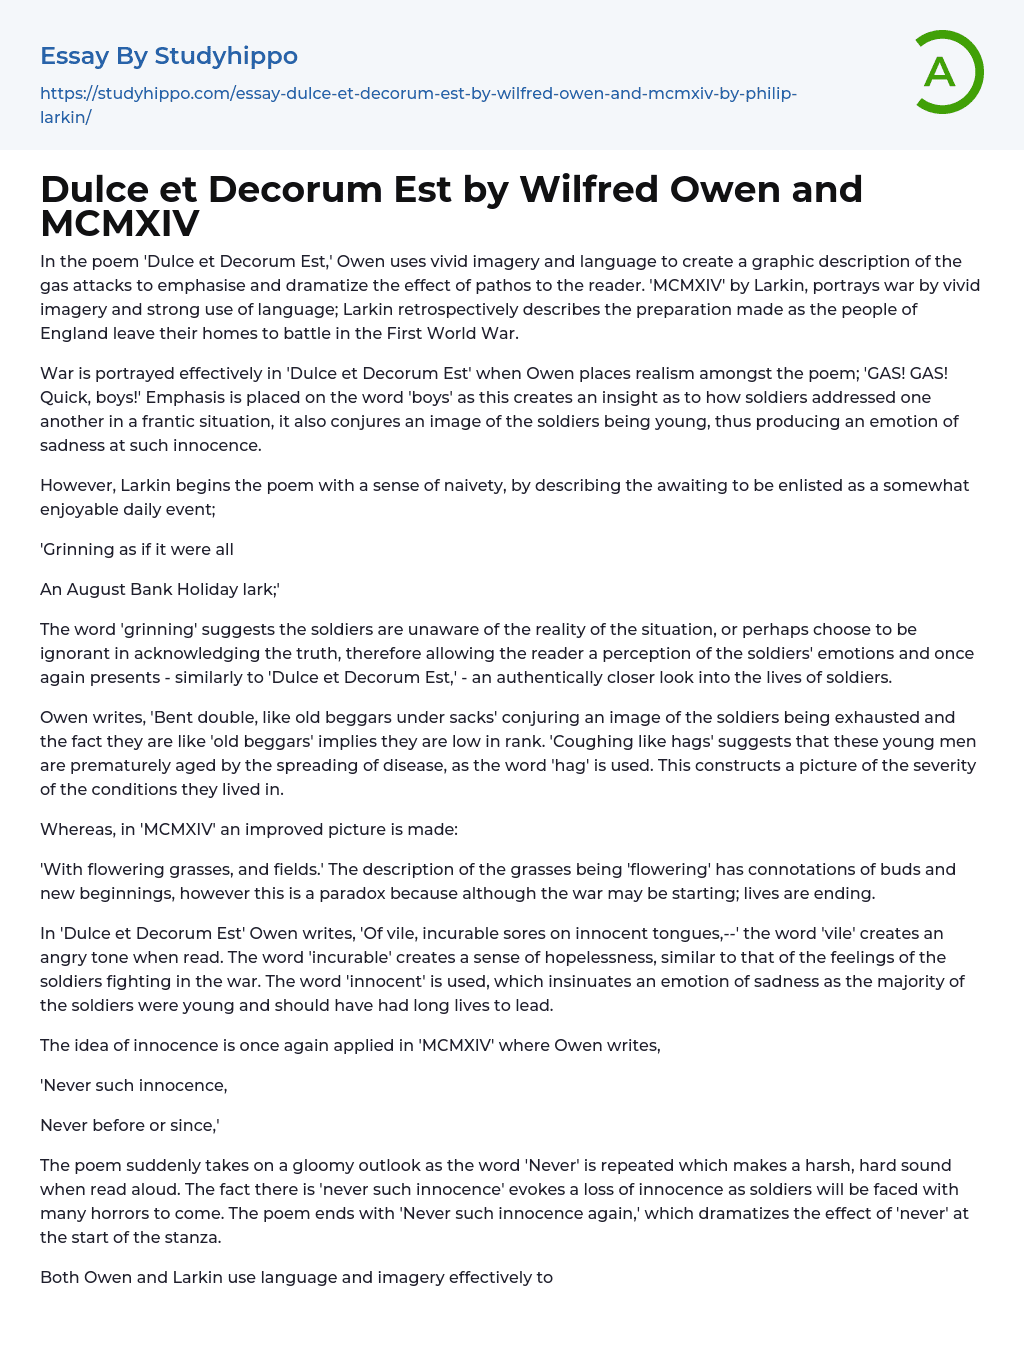 Dulce et Decorum Est by Wilfred Owen and MCMXIV Essay Example